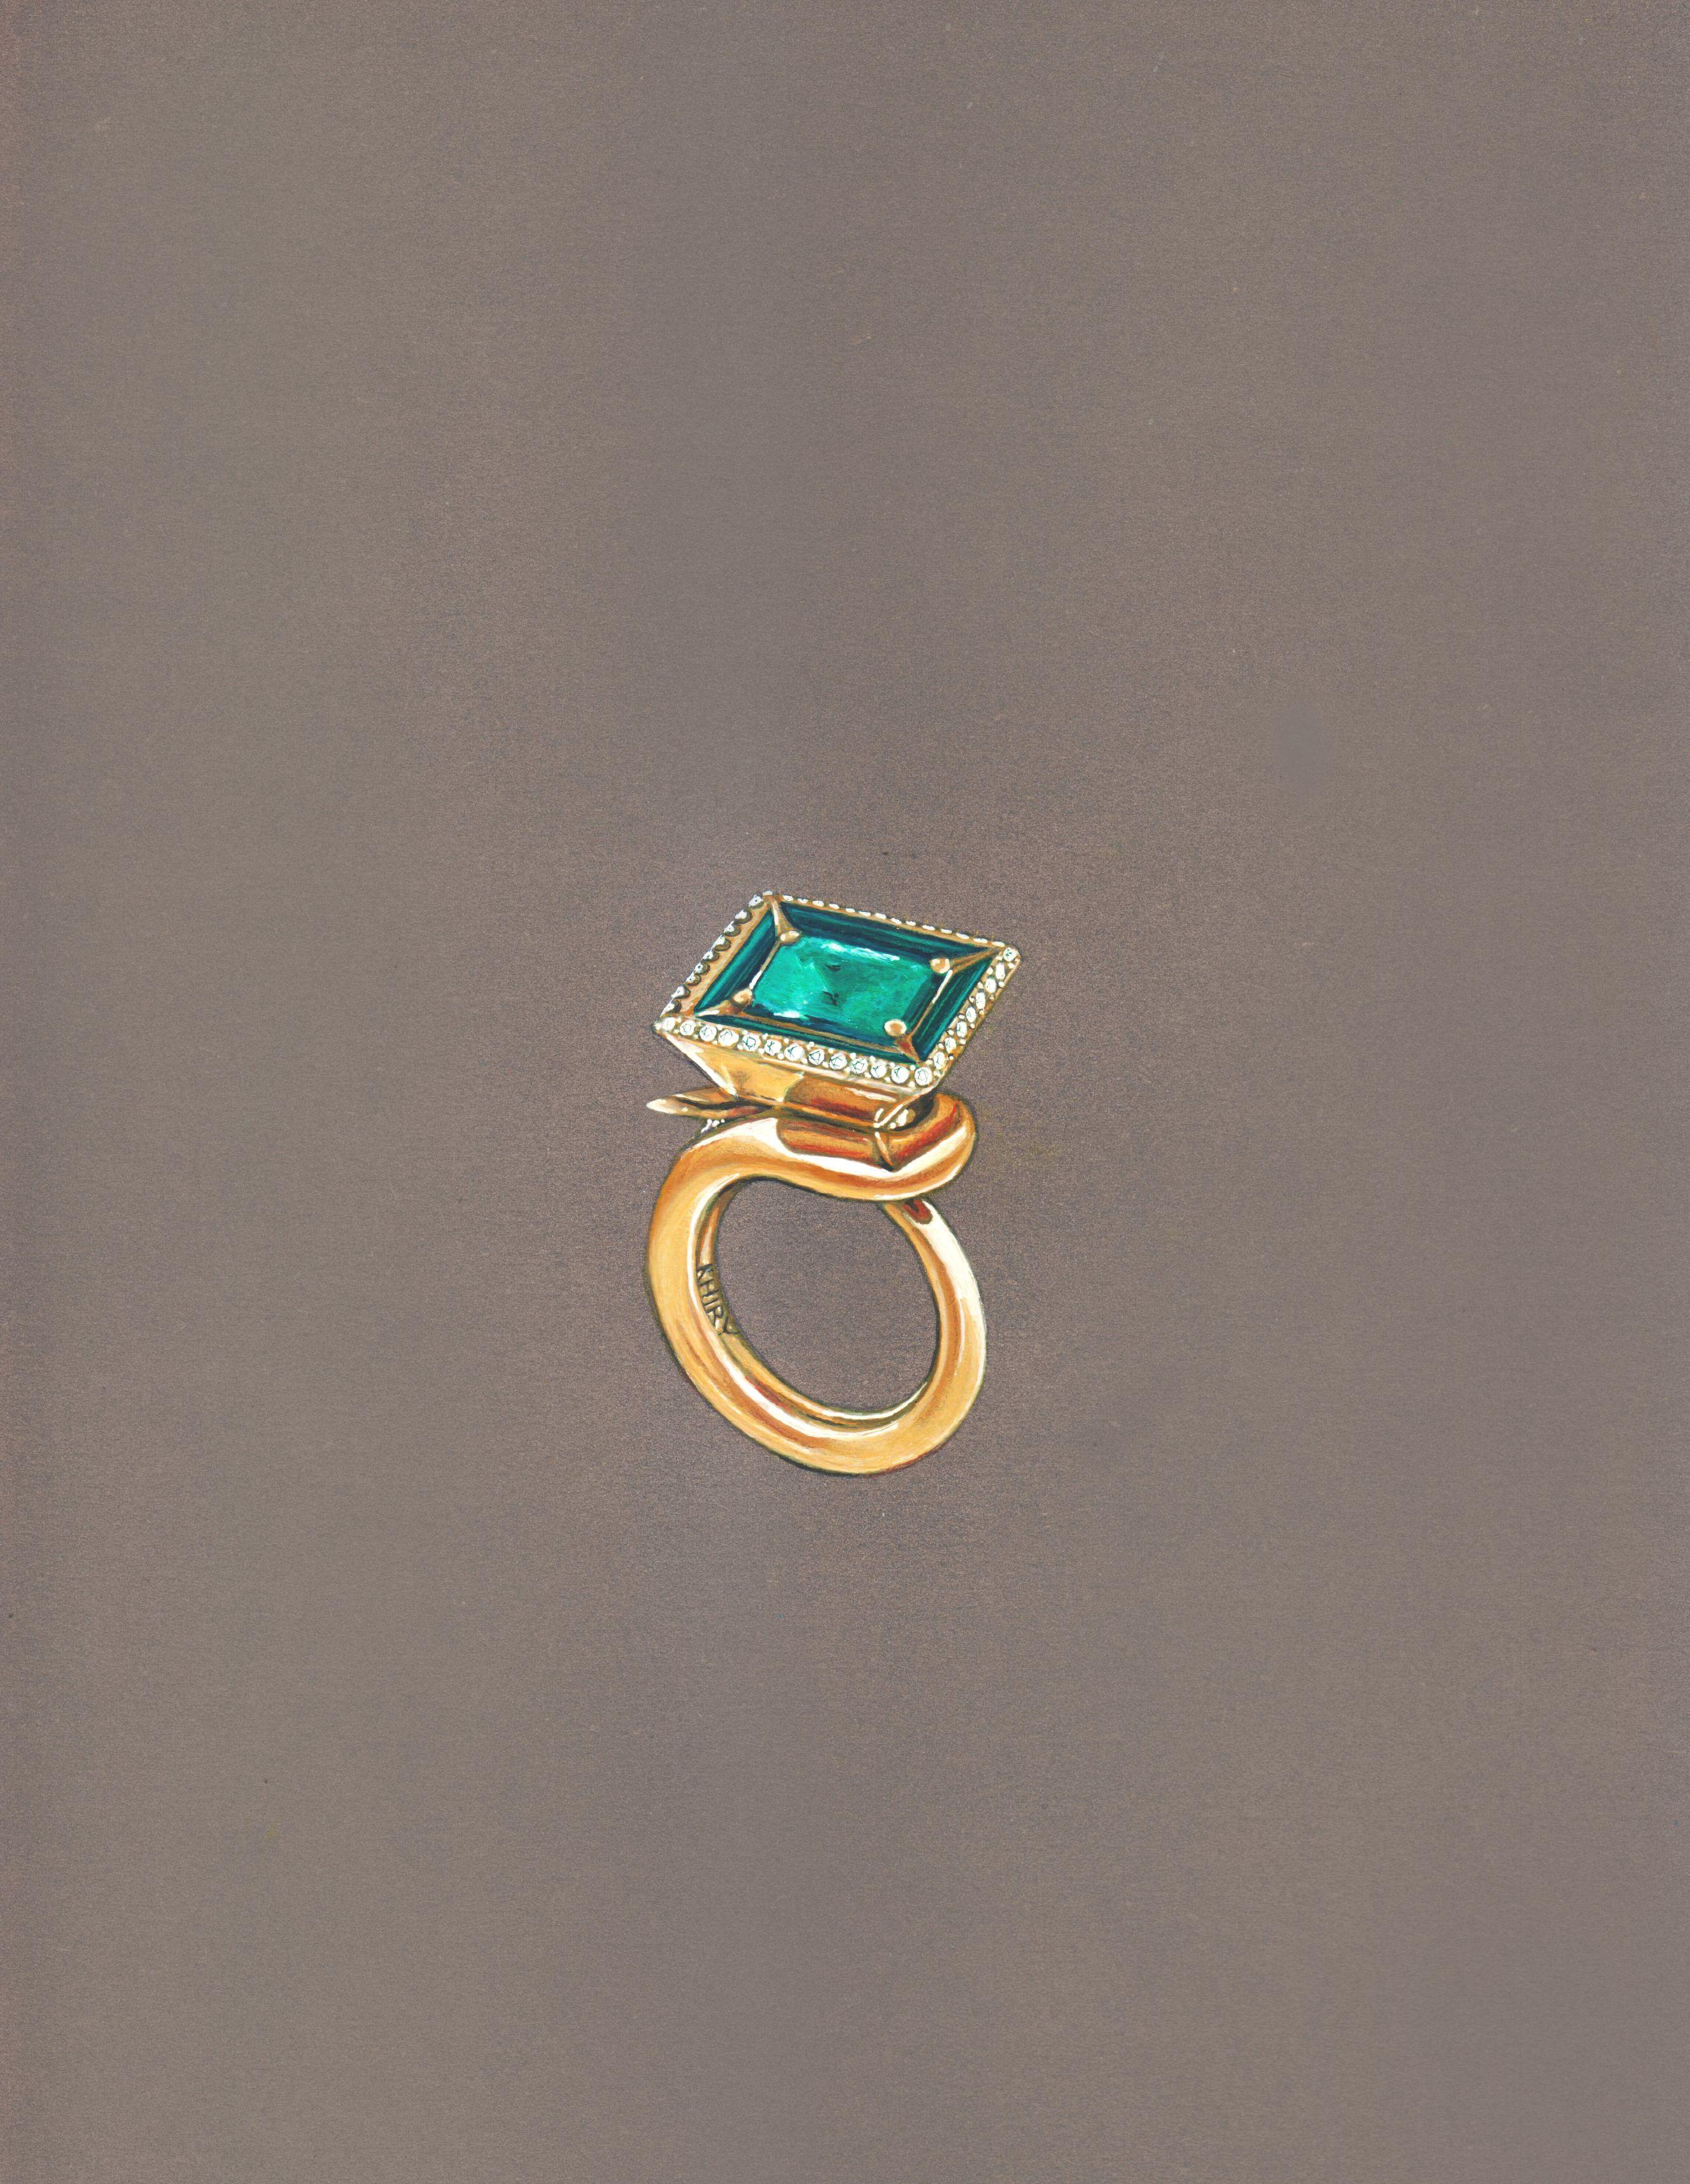 Pavilion Ring in 18k Gold with Emerald, Diamond Trim & Malachite Inlay For Sale 1